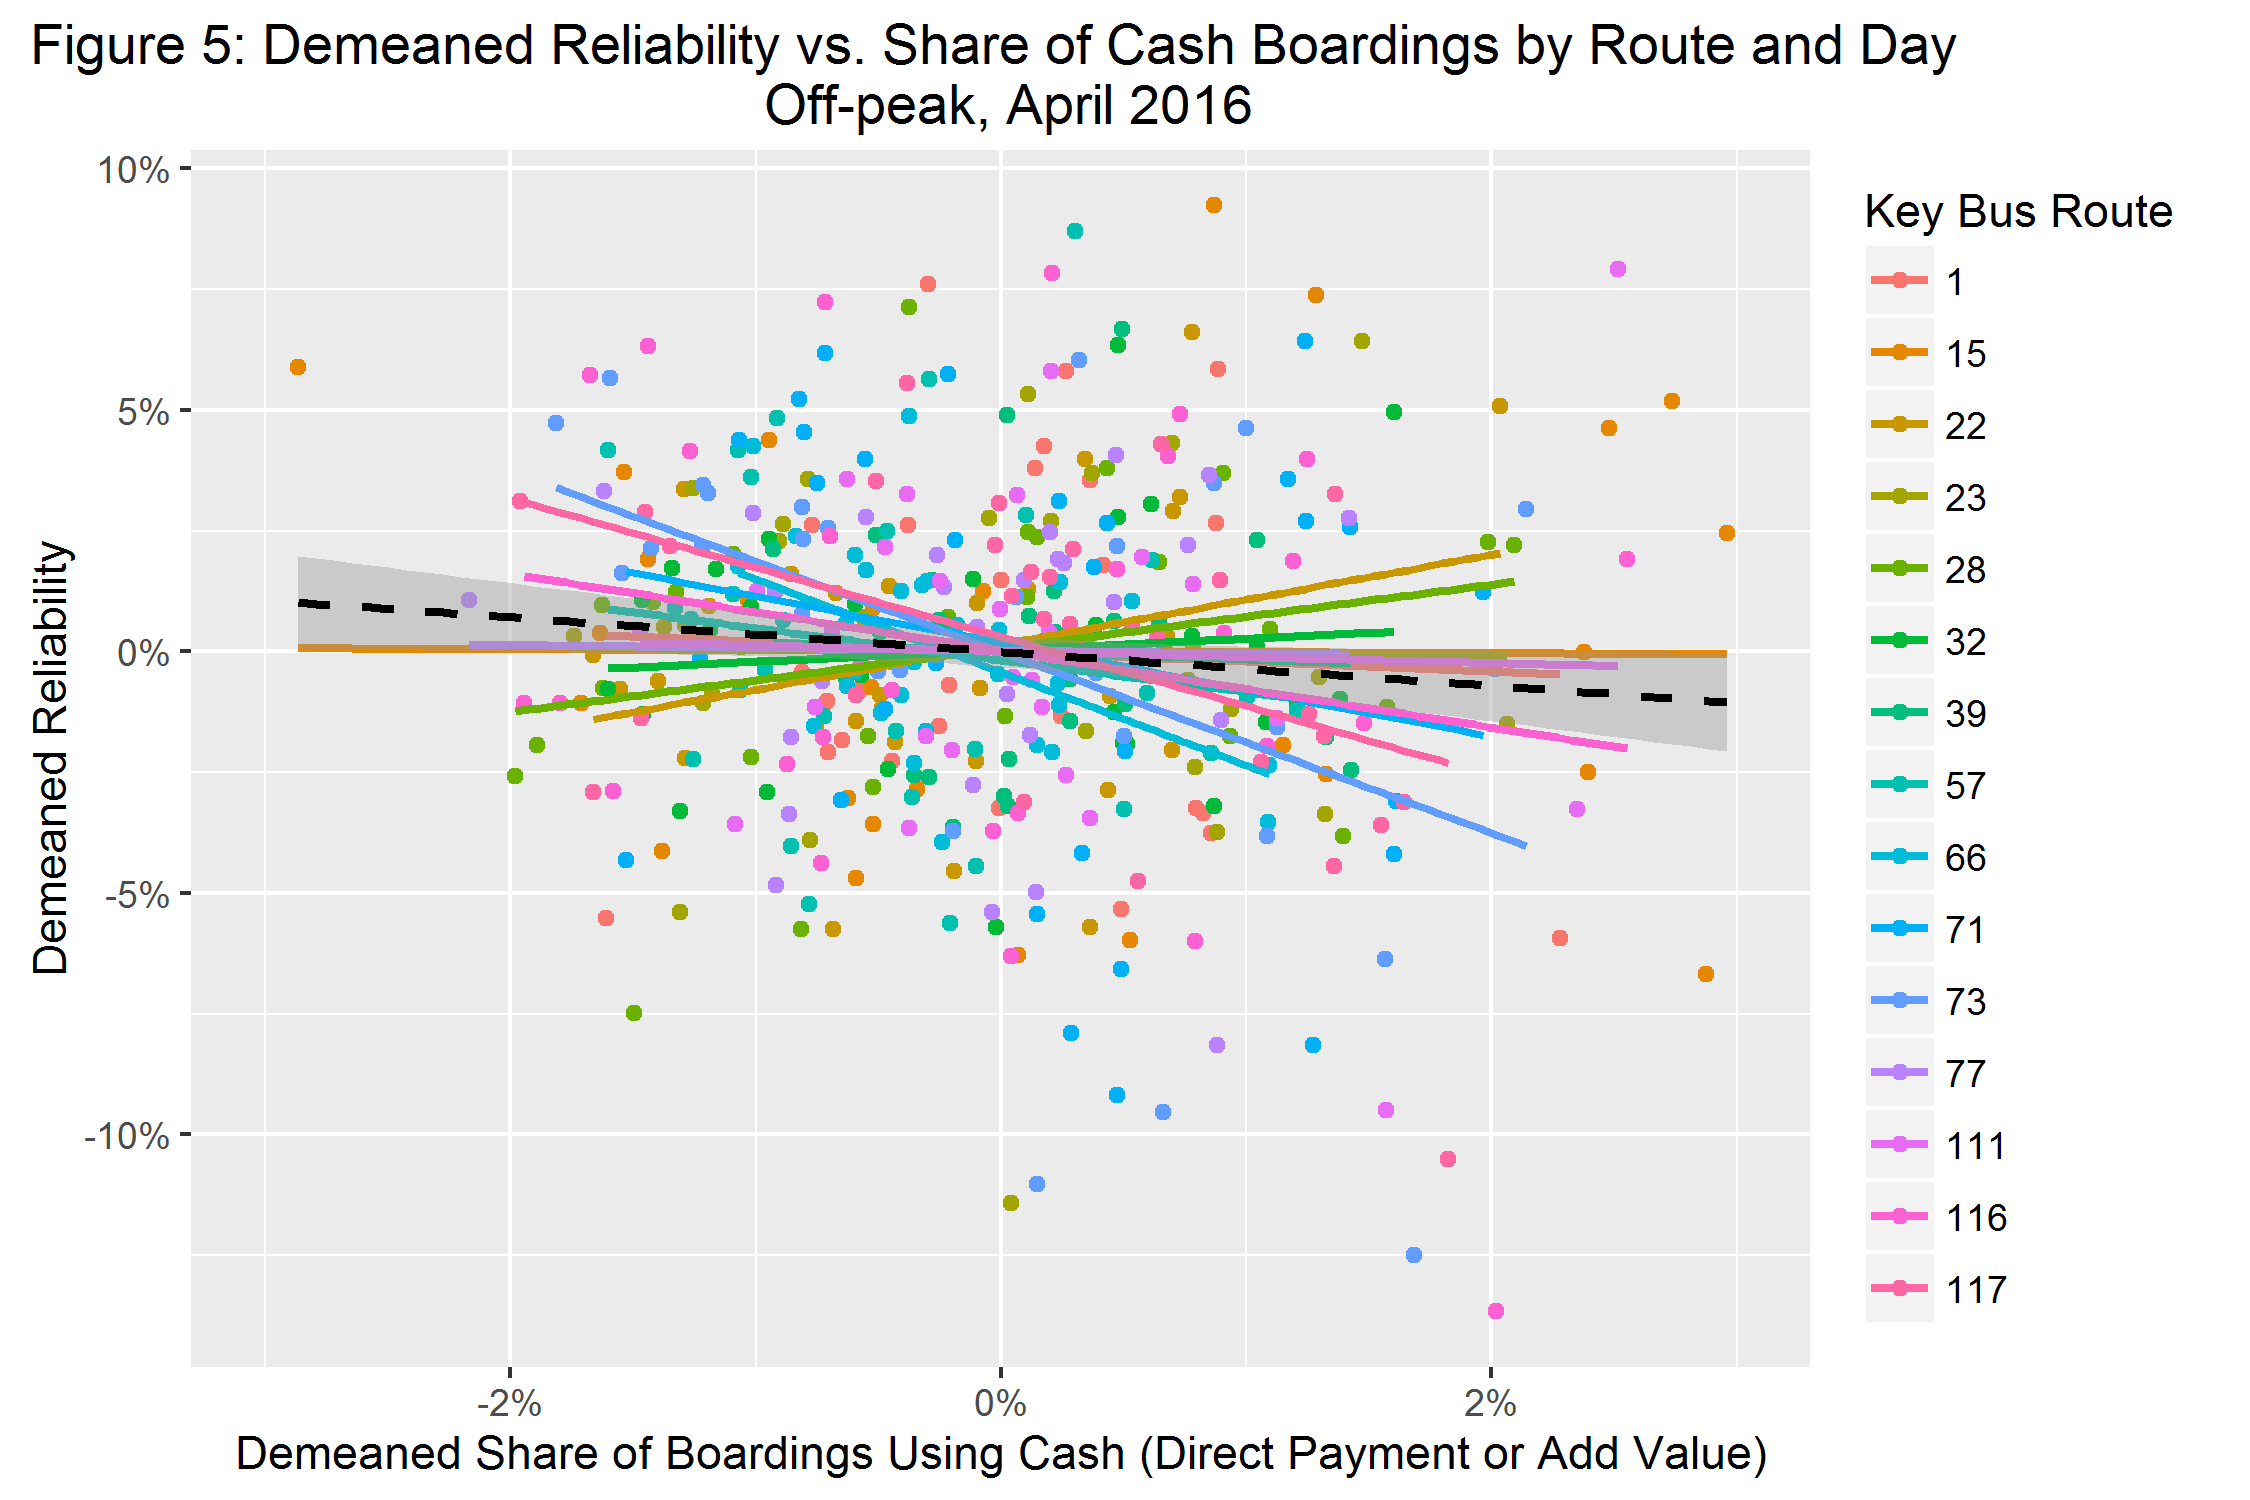 De-meaned Reliability vs. Share of Cash Boardings by Route and Day